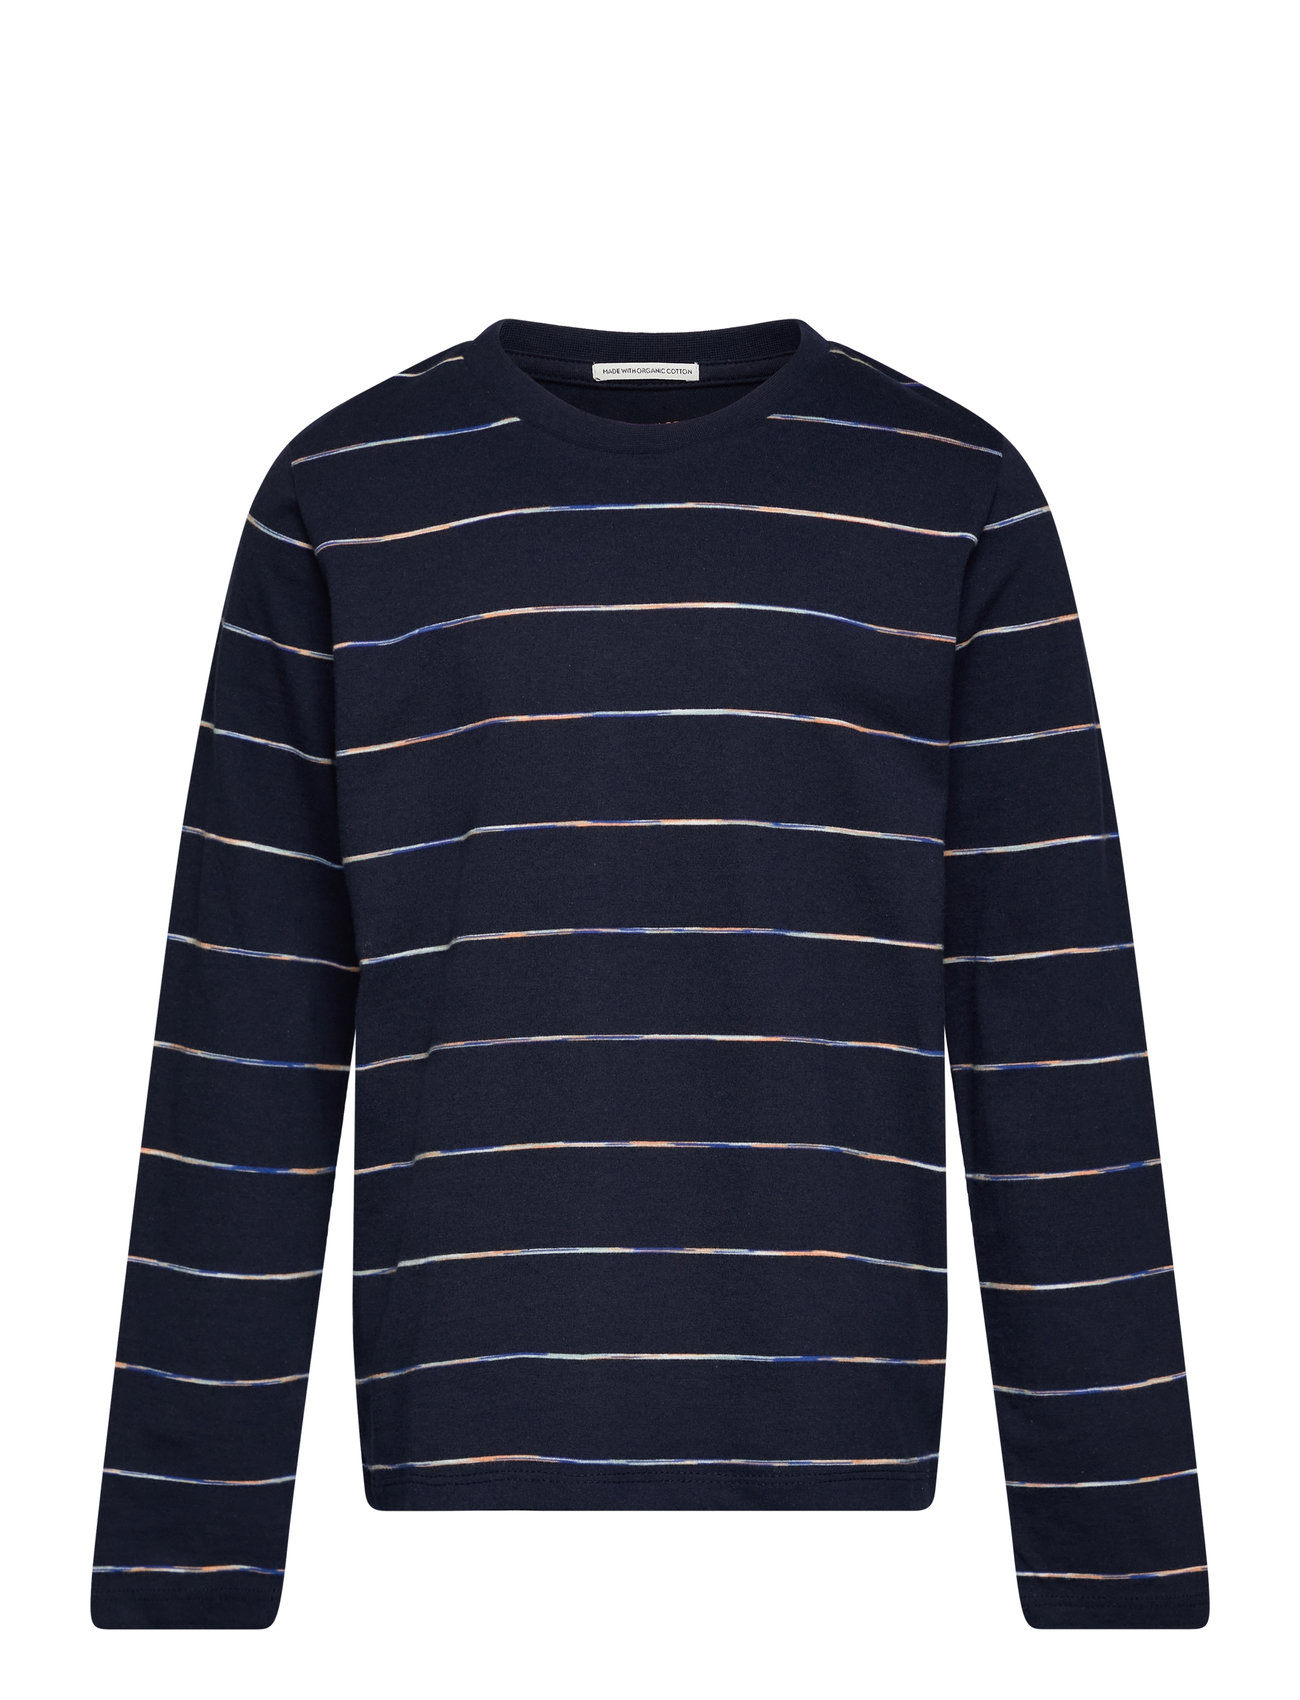 Tom Tailor Multicolor Striped Longsleeve - Long-sleeved t-shirts